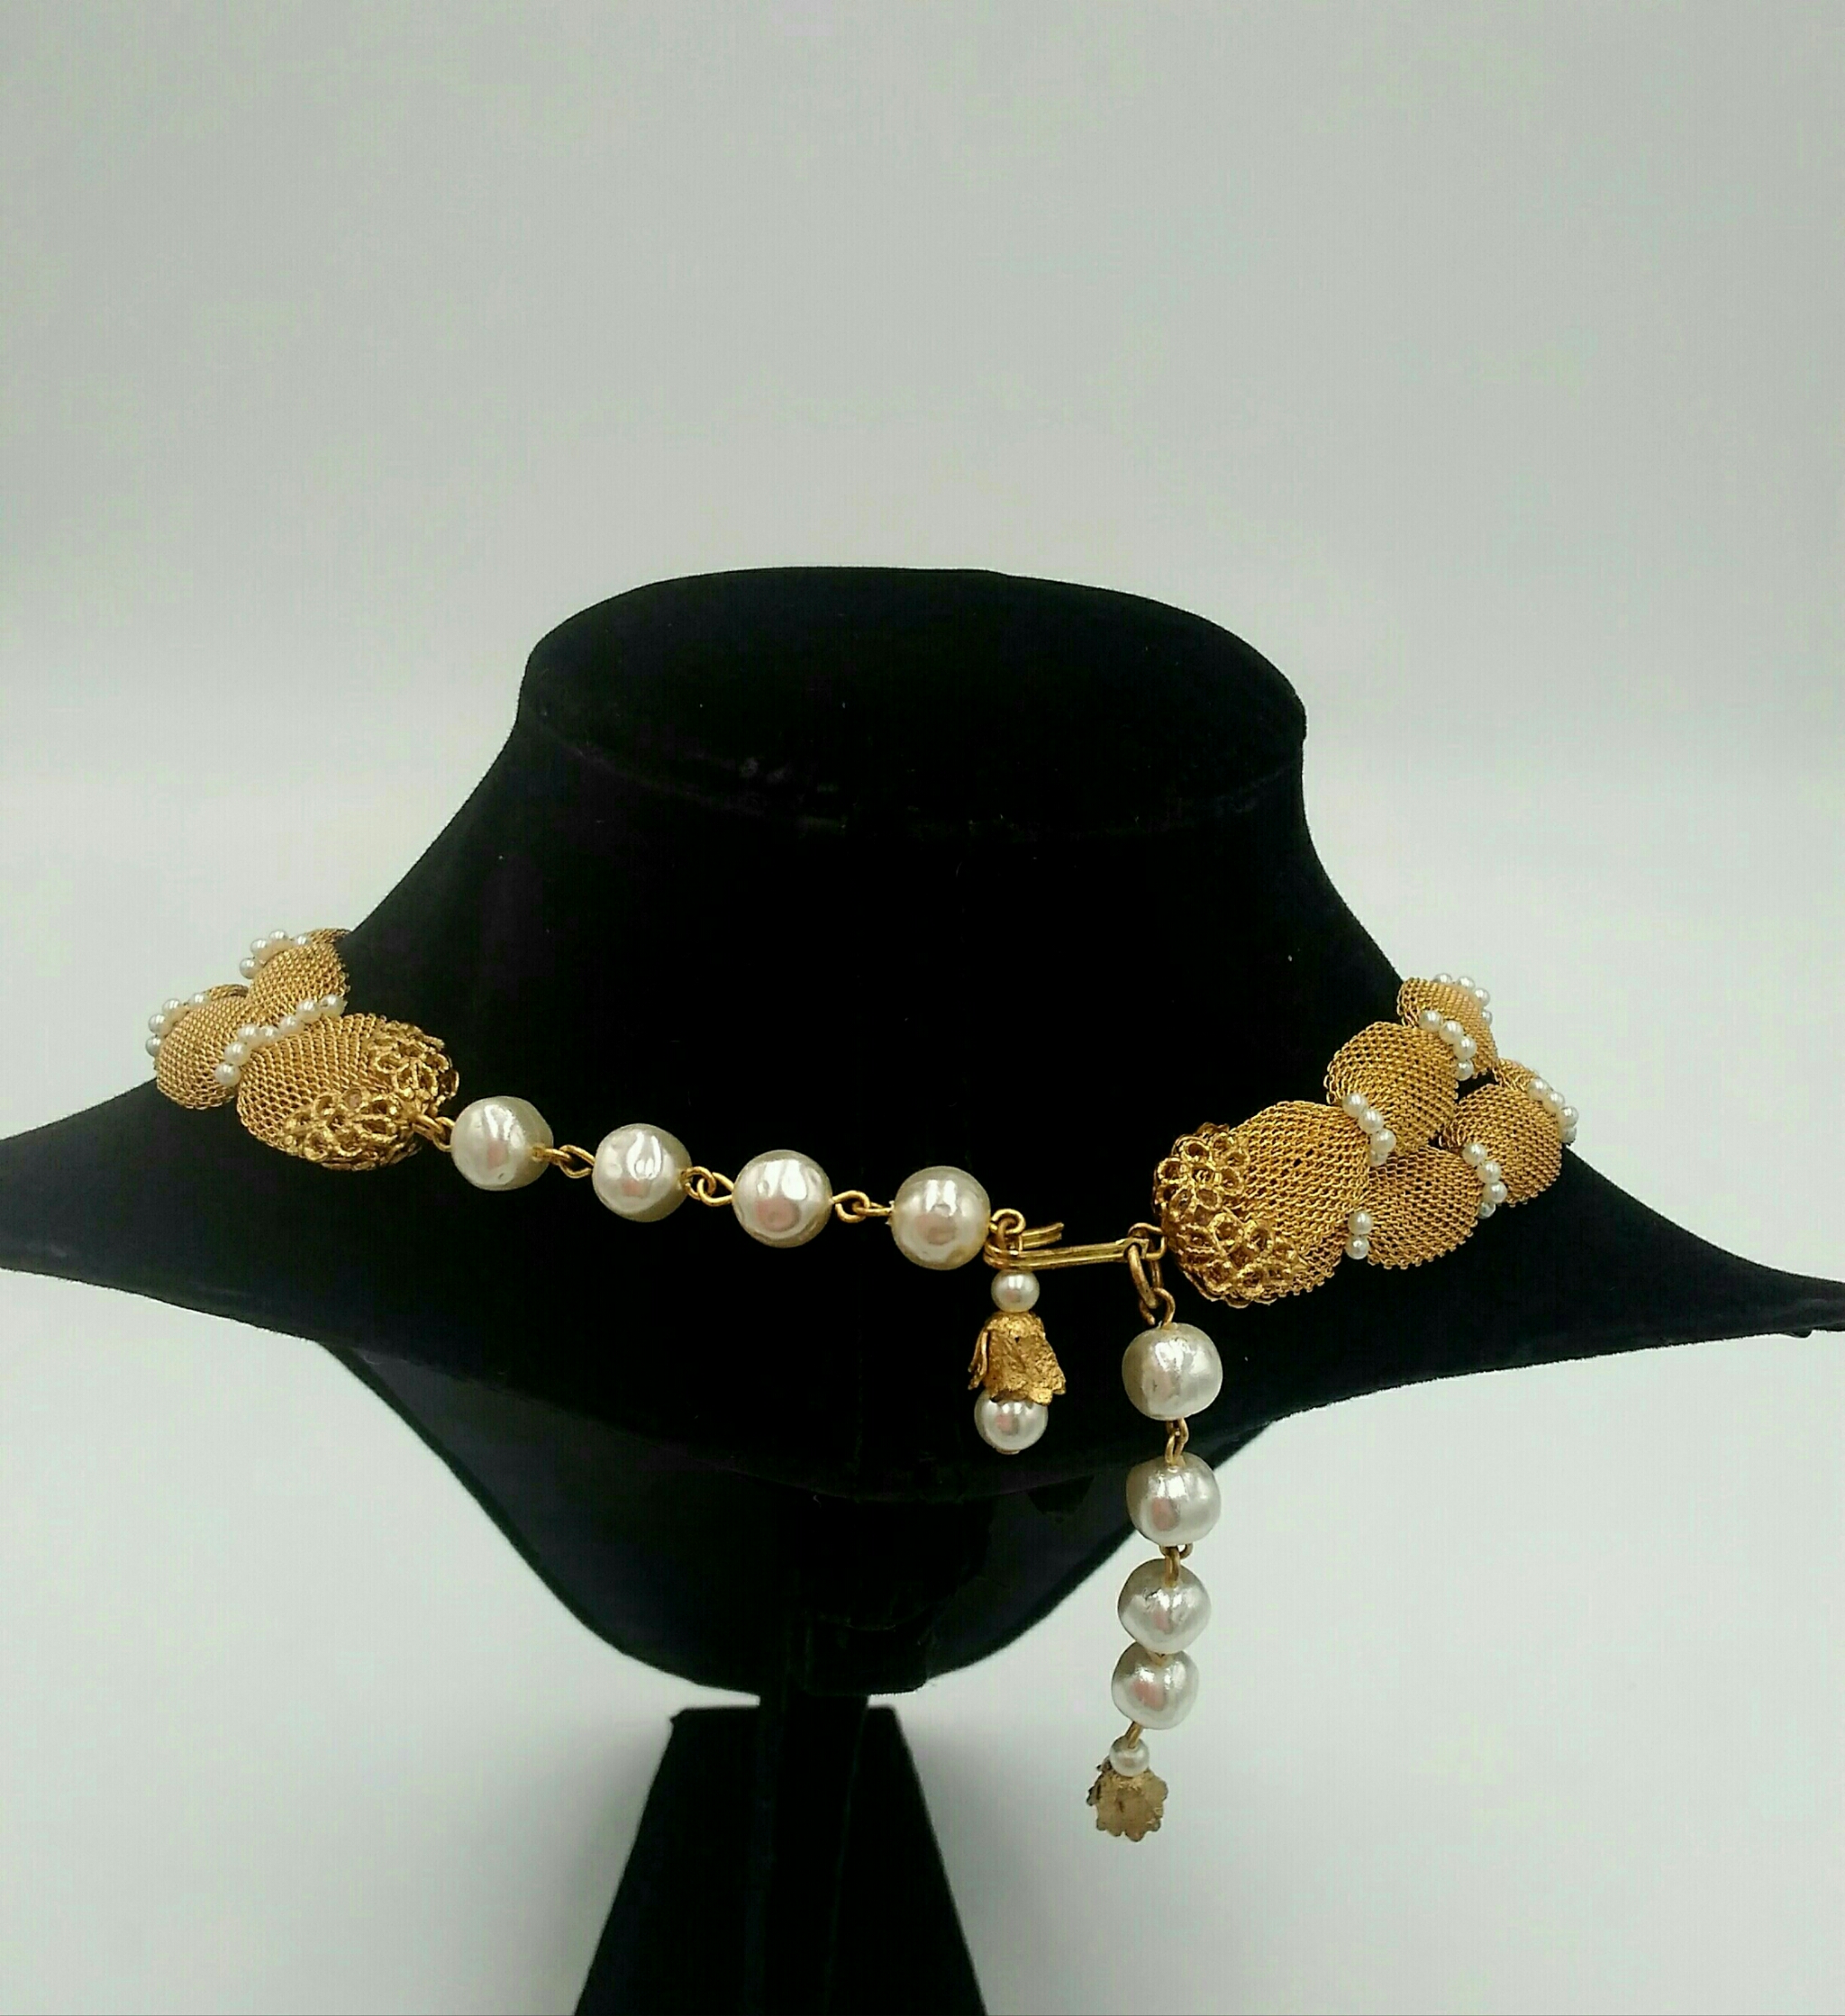 Vintage 1960's Gold Tone Mesh and Faux Pearl Jewelry Set